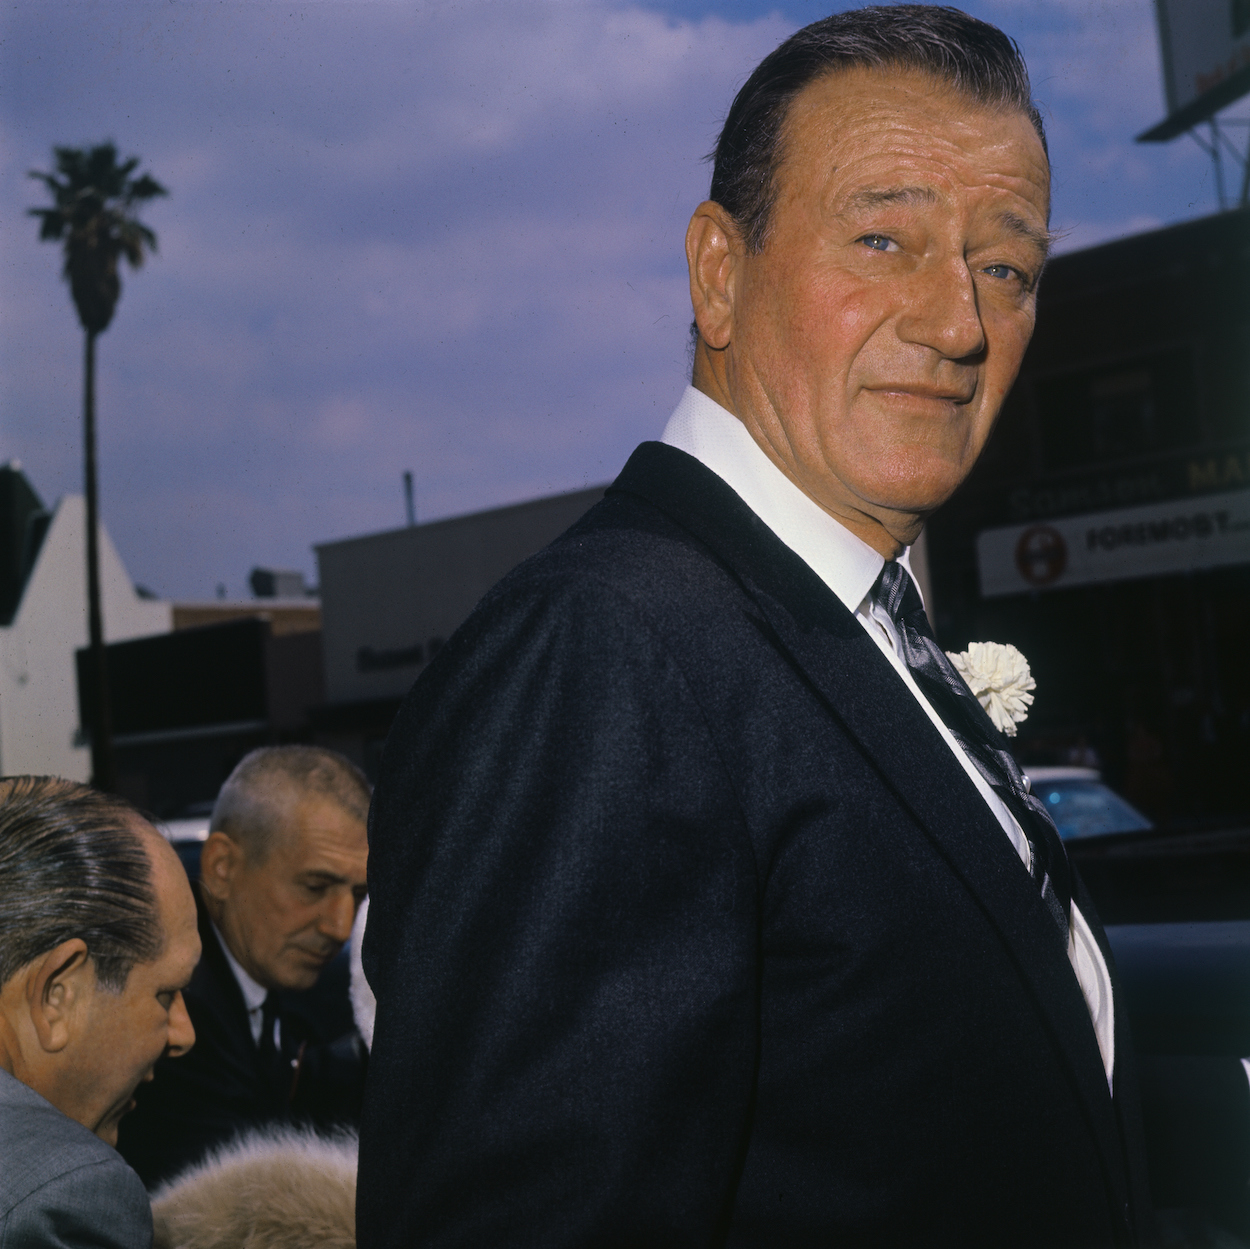 John Wayne on his daughter's wedding day. The Duke had a voice cameo in 'Star Wars,' but it sounds nothing like his signature drawl.